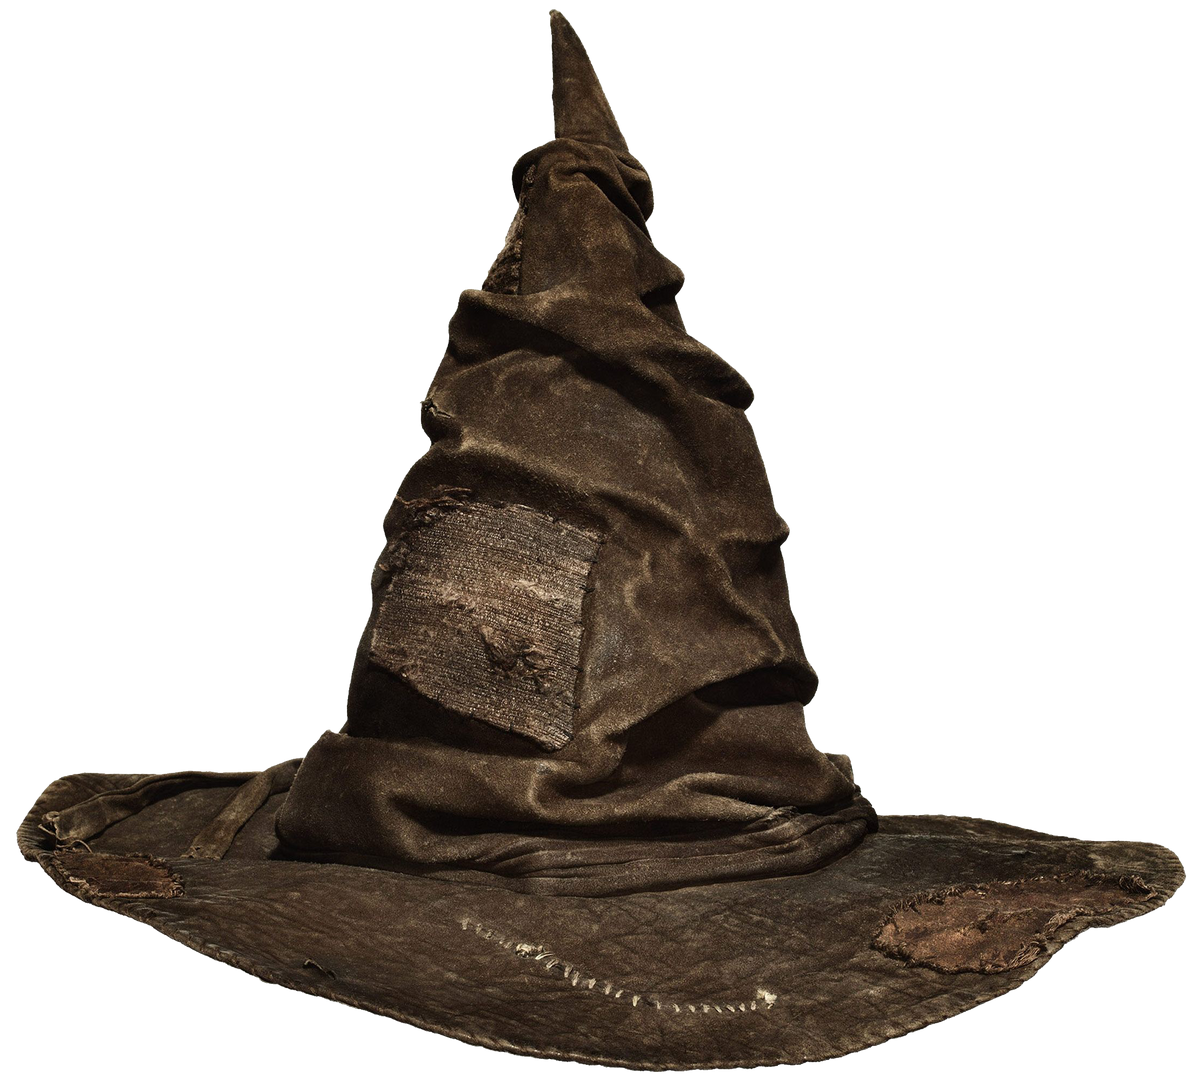 Harry Potter (Sorting Hat Ravenclaw - Personalized) Graphic Art